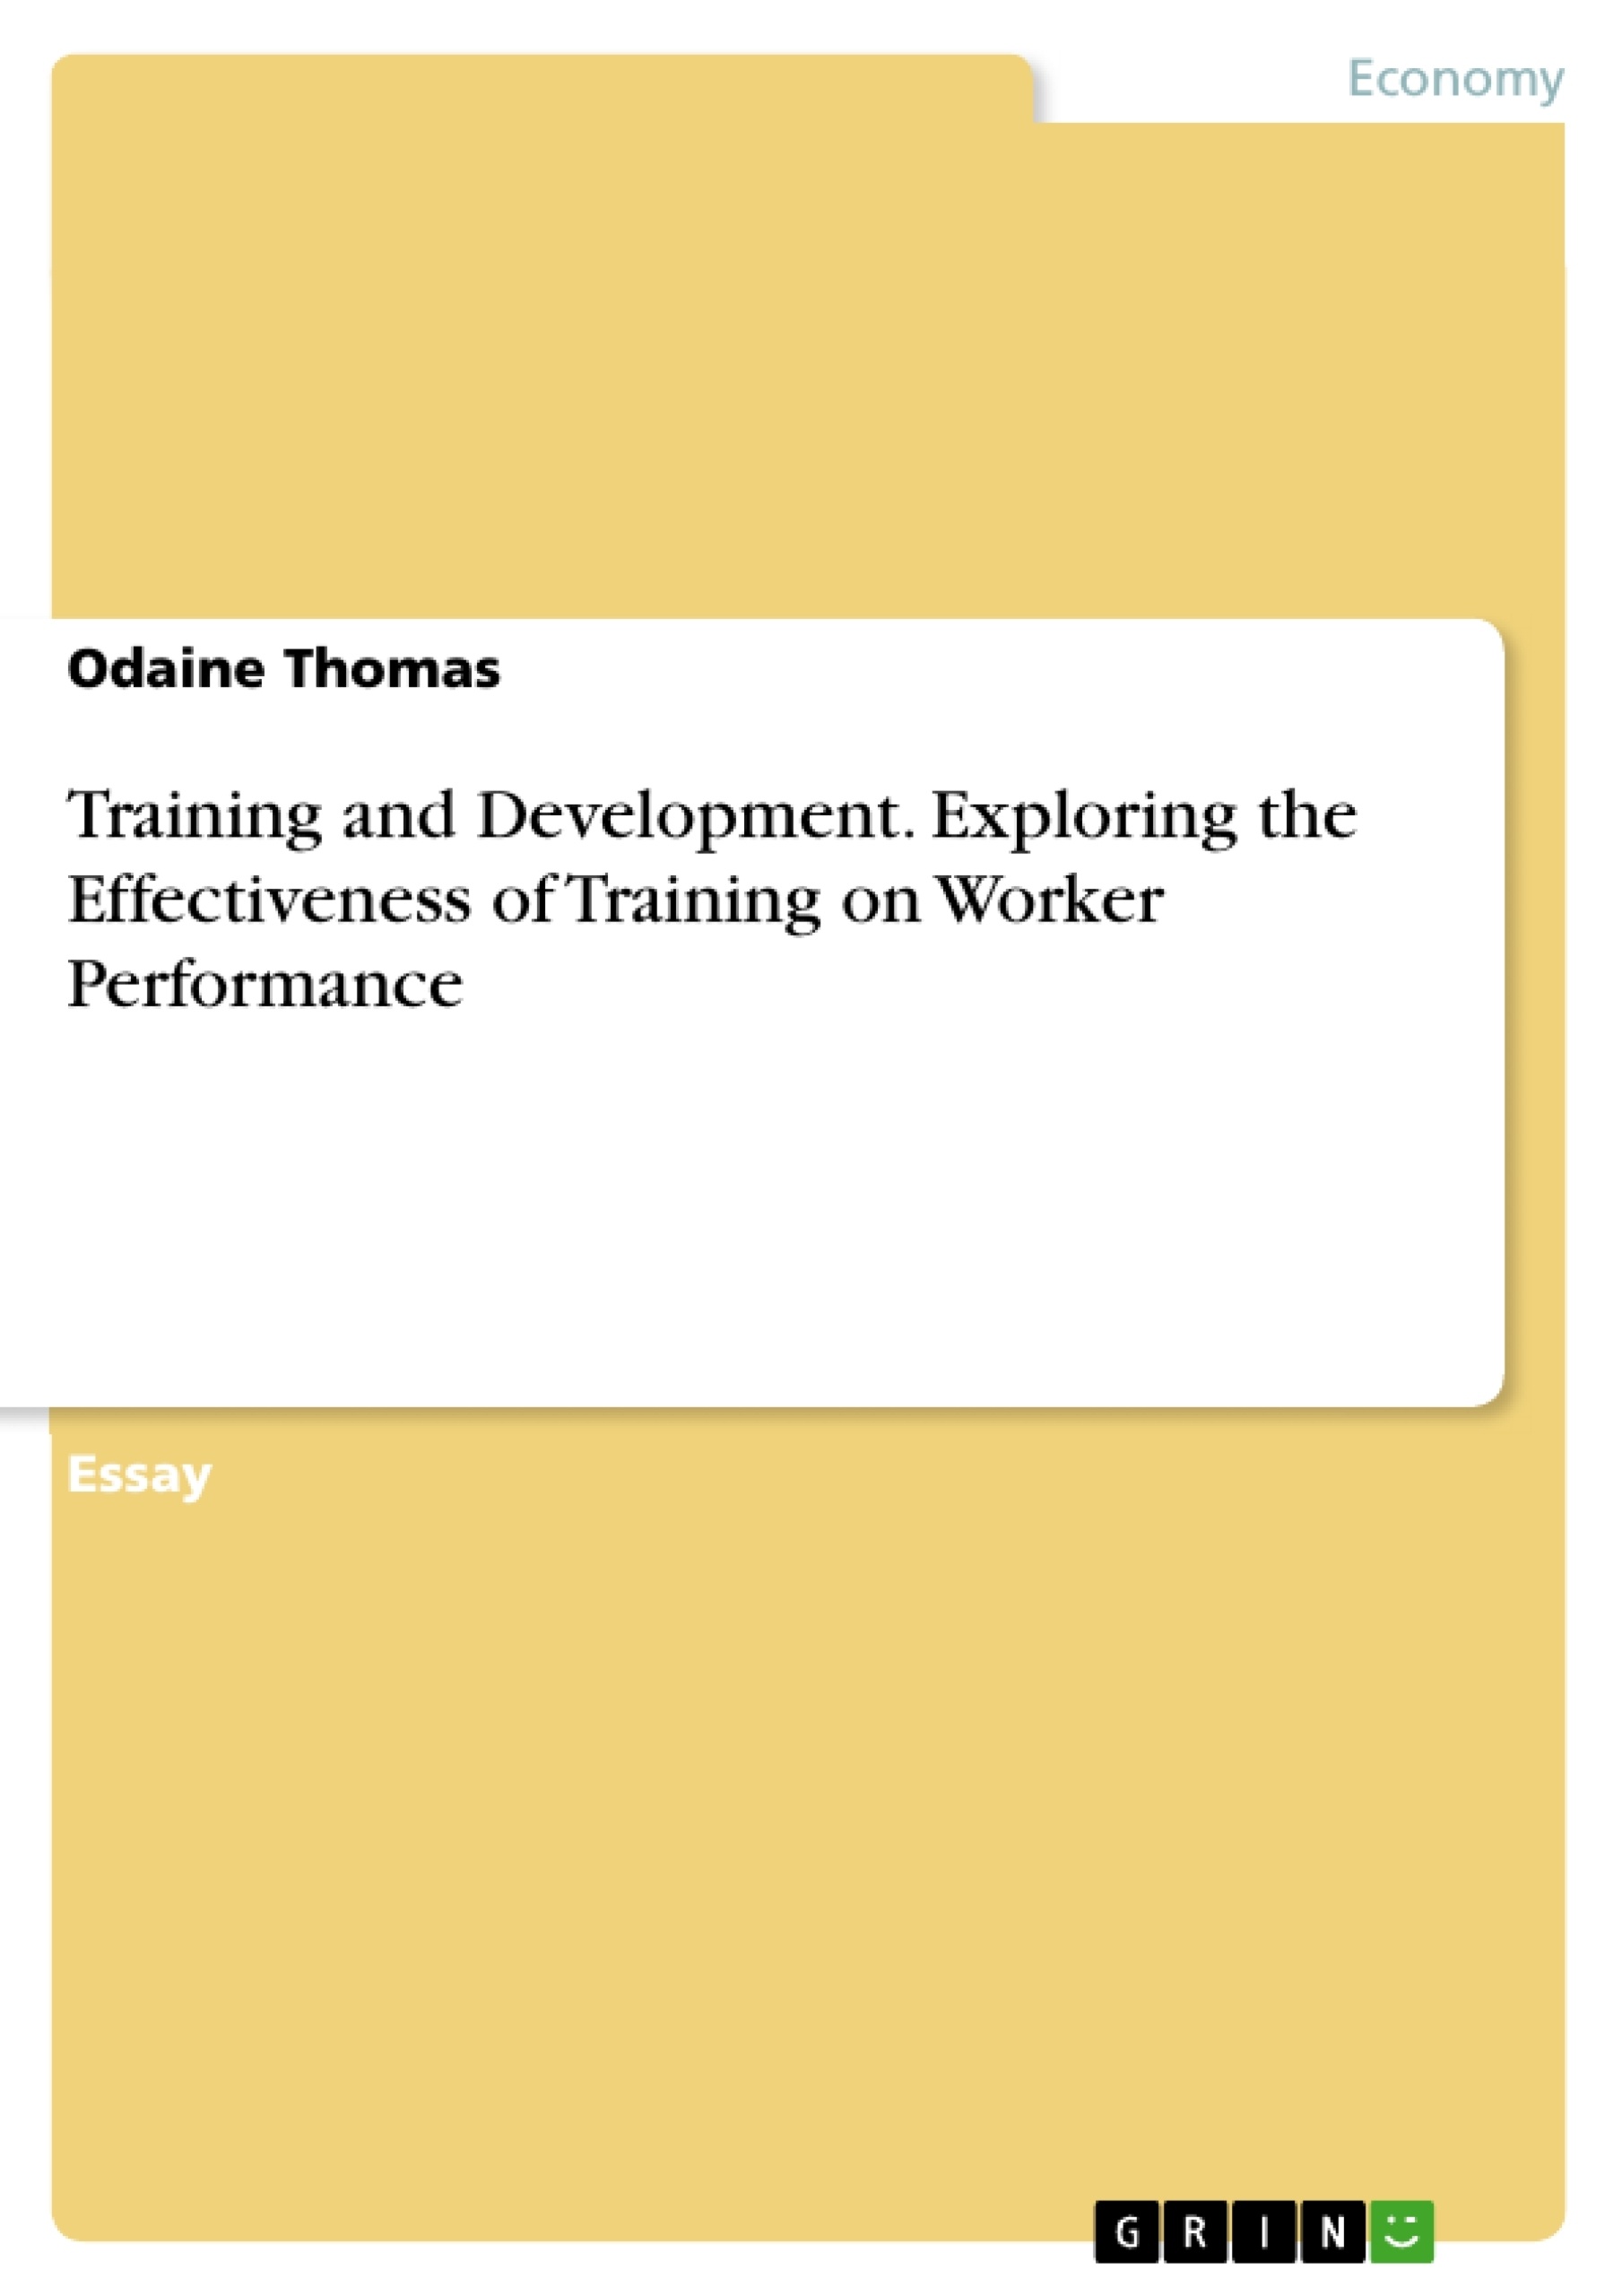 the effectiveness of training and development